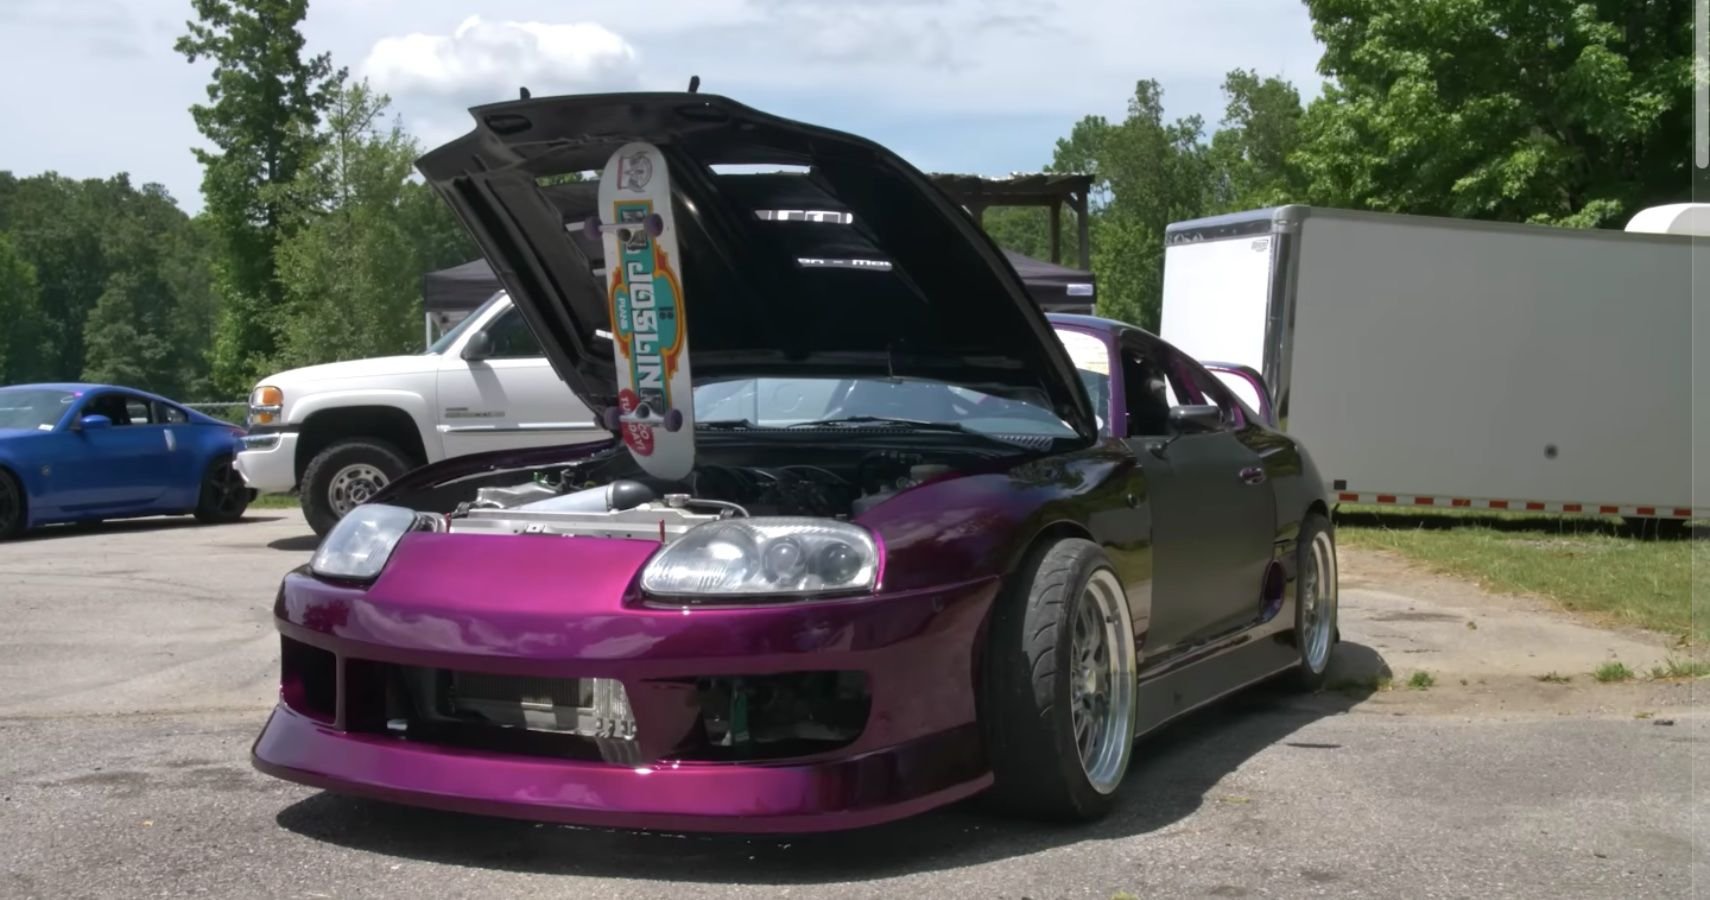 Toyota Purists Look Away: This LS-Swapped A80 Supra Is A Real Drift Missile